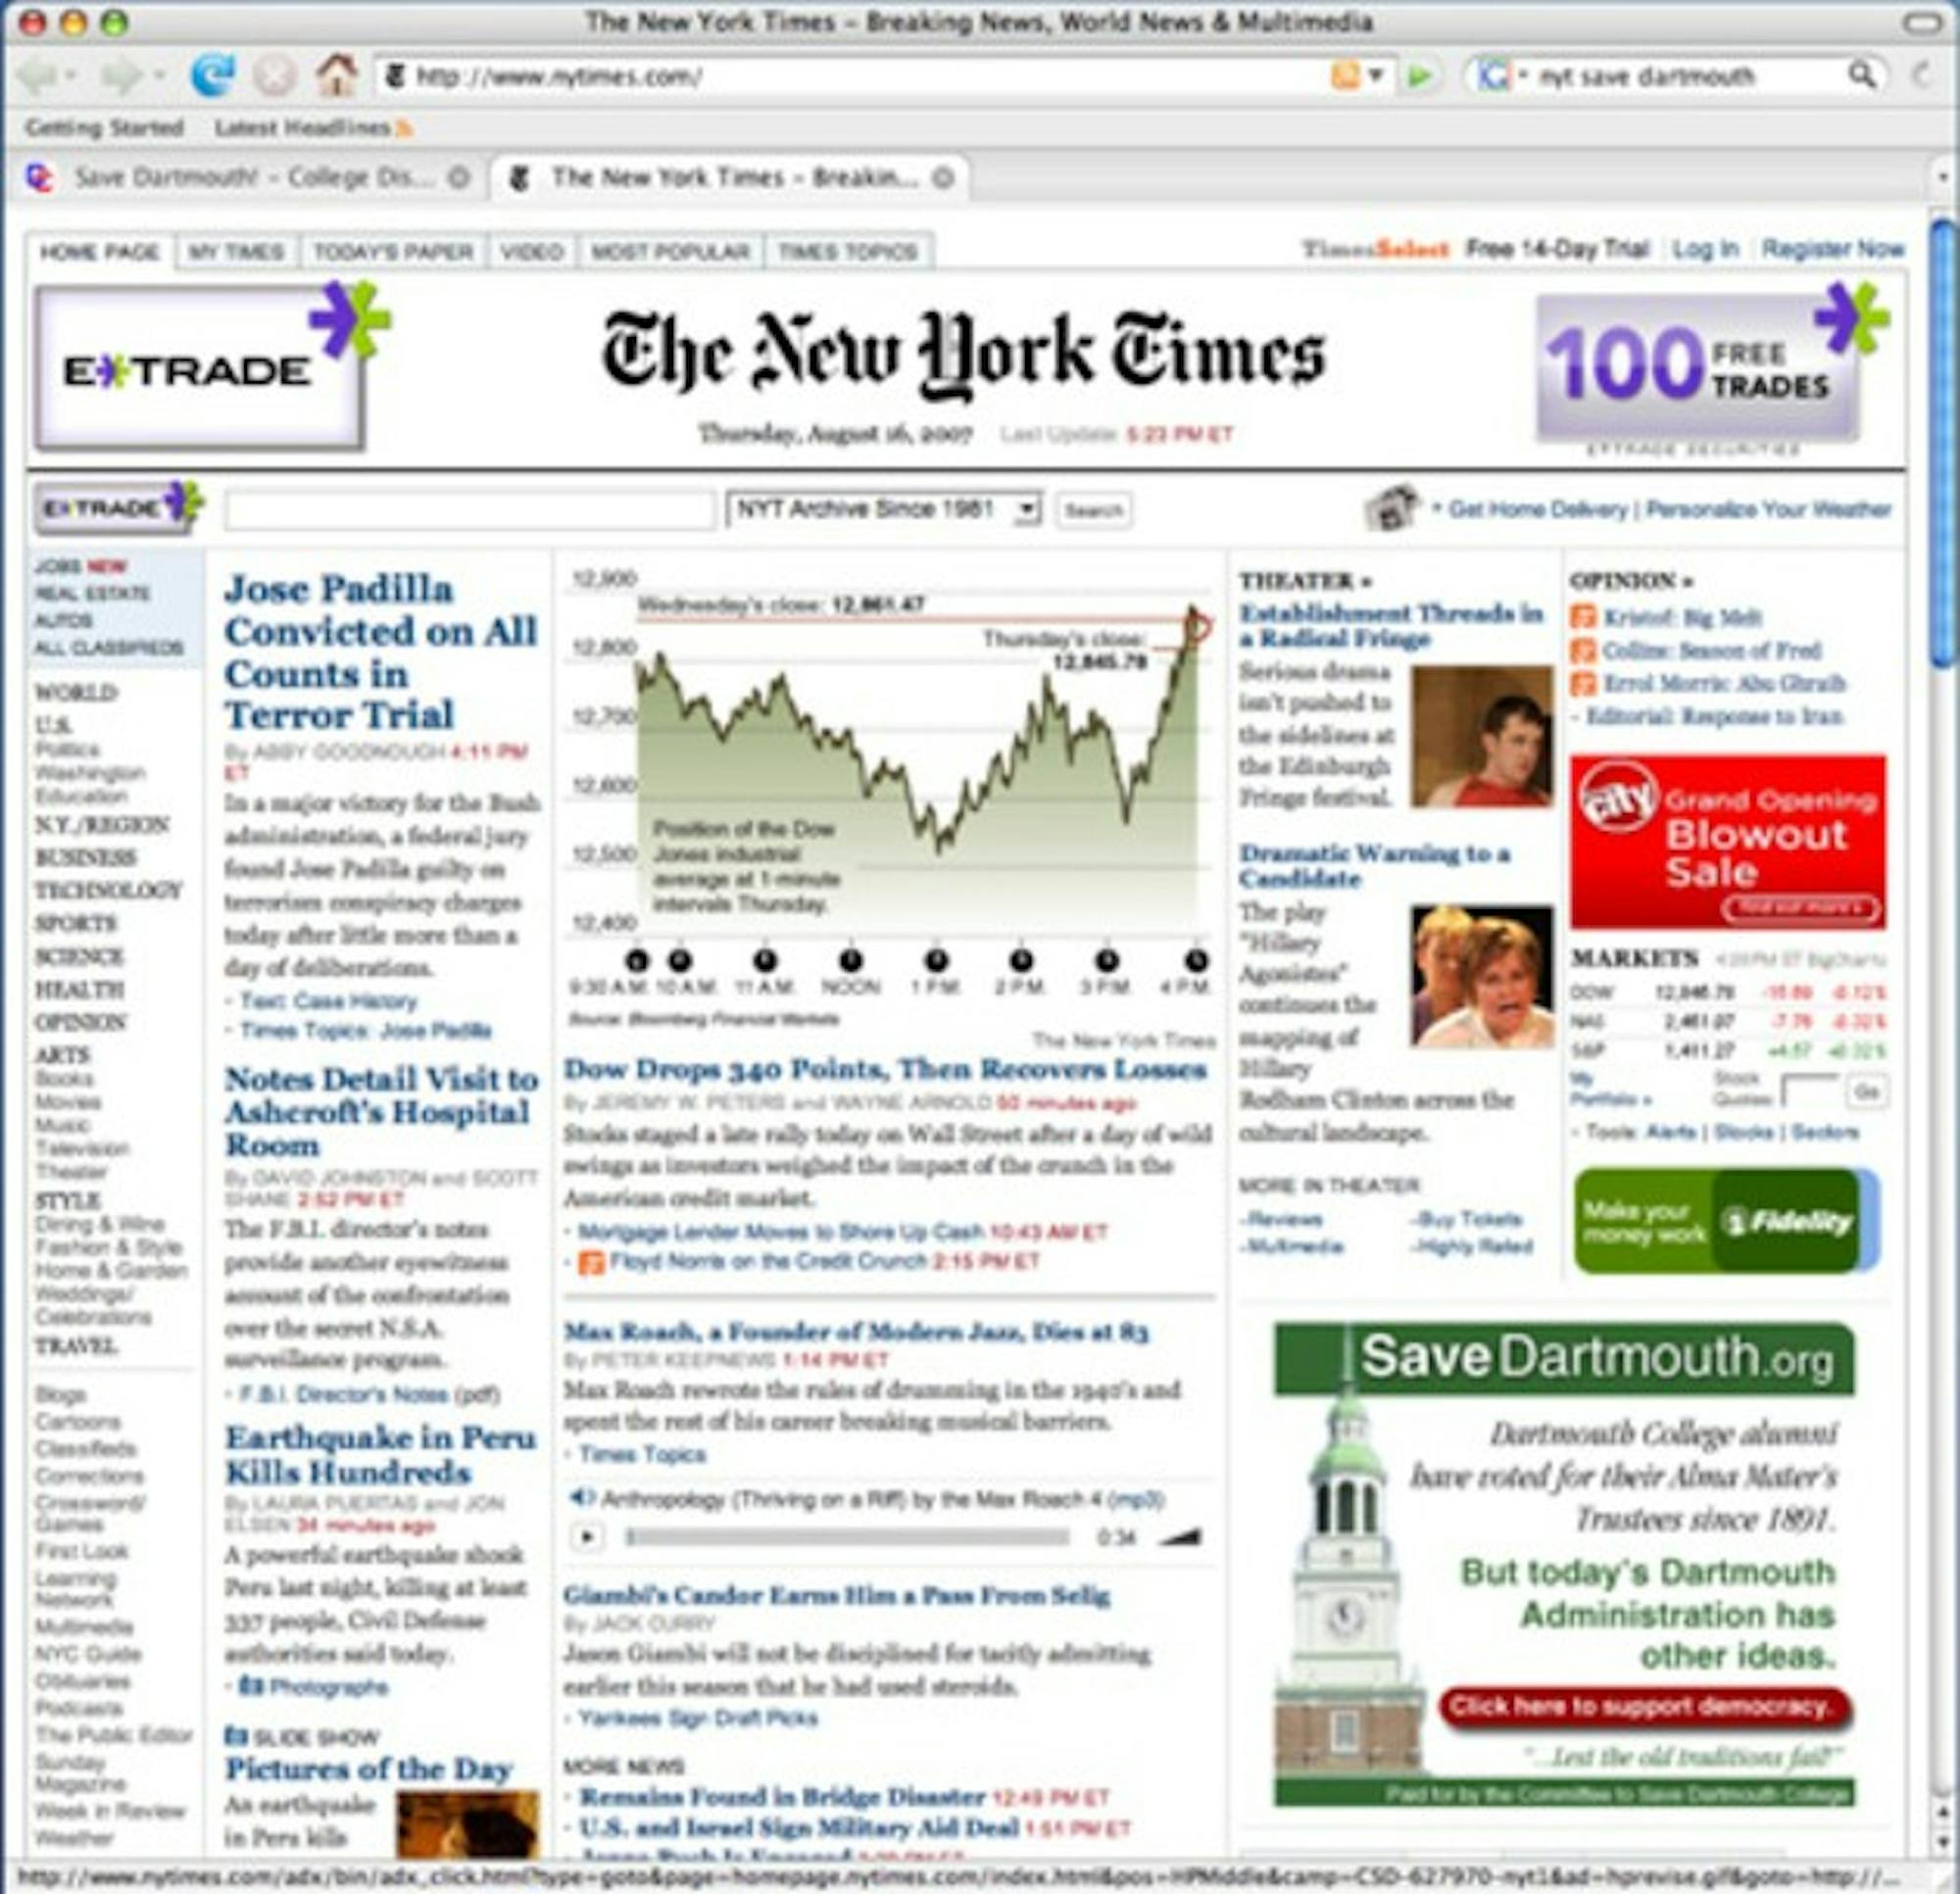 A screenshot of nytimes.com from Thursday. The CSDC ad is located in the lower right.